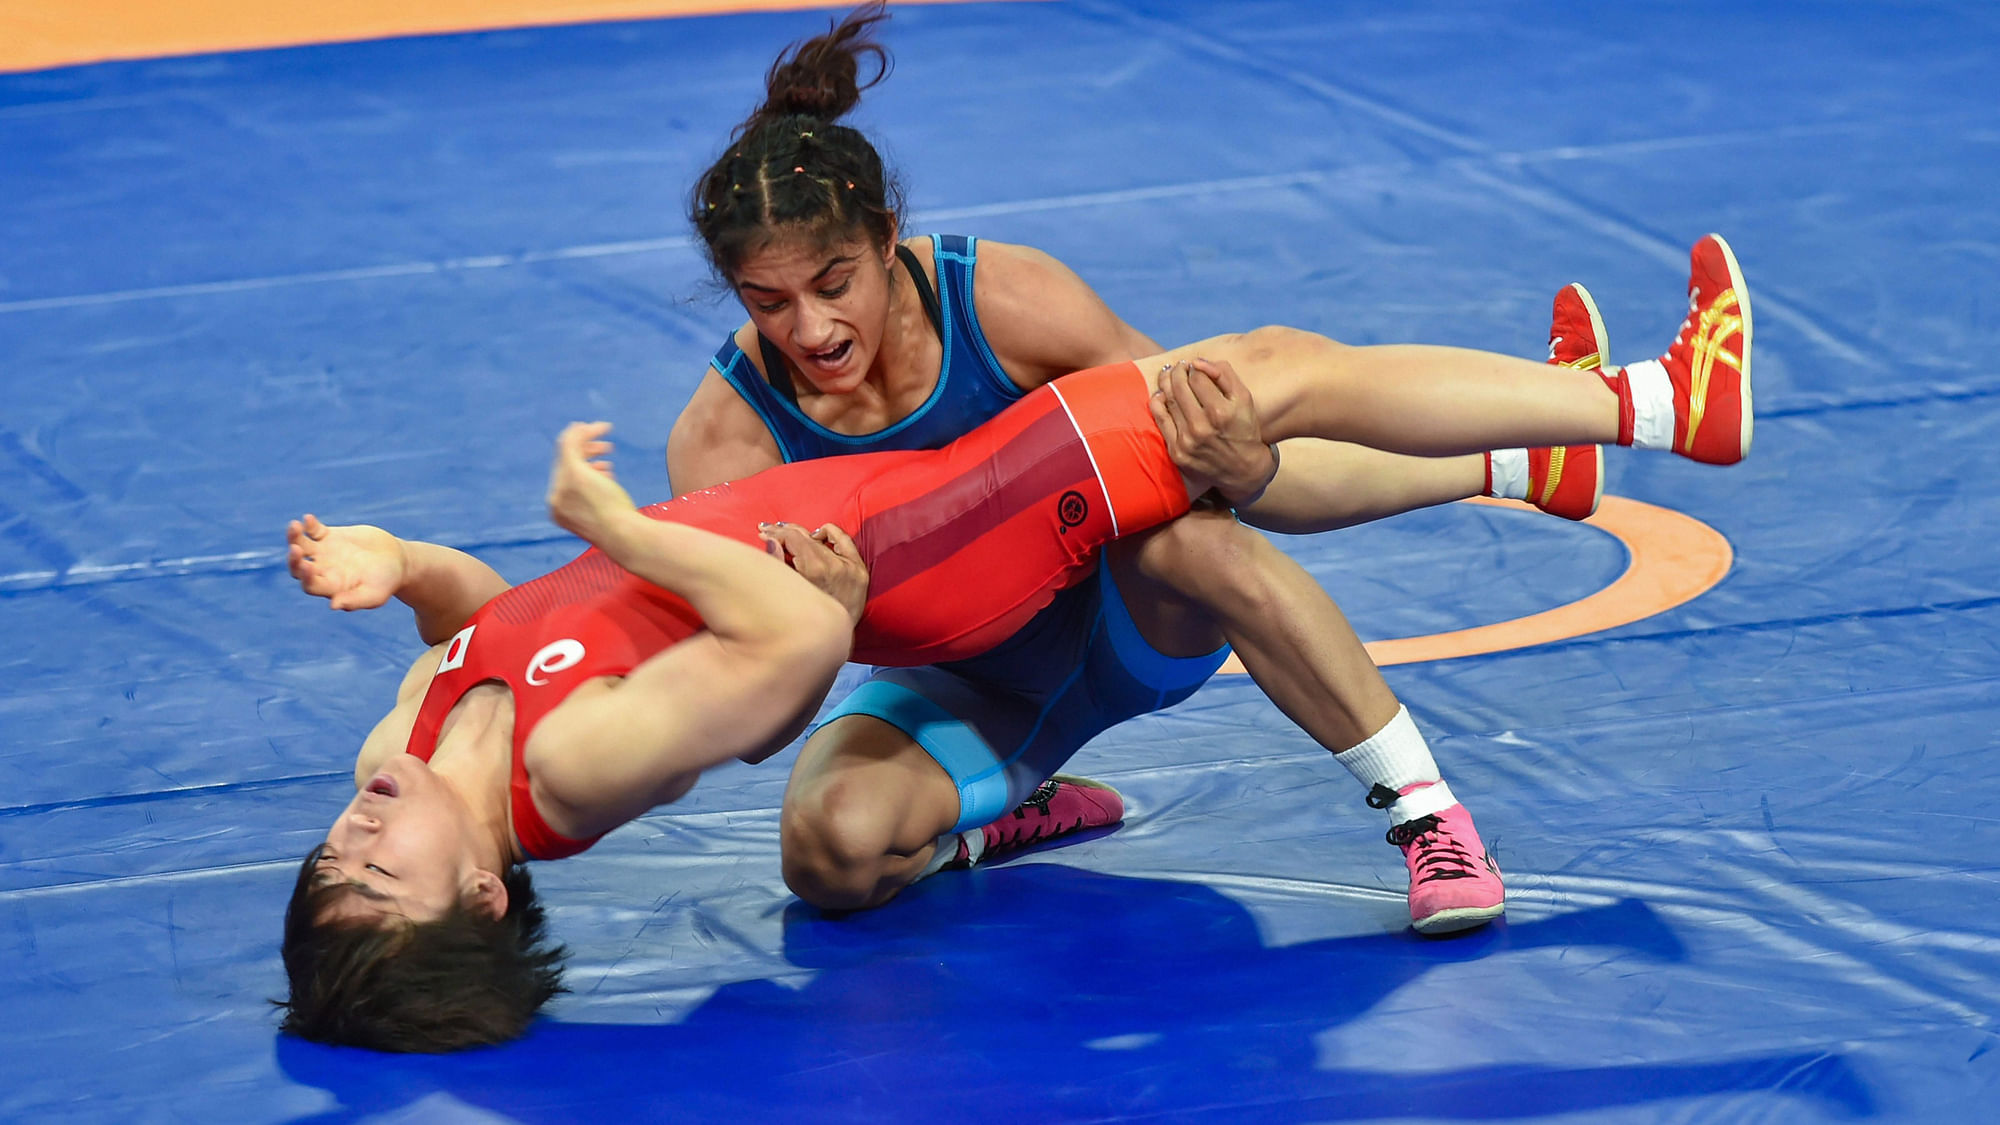 File photo of Indian wrestler Vinesh Phogat competing in the 50 kg category gold medal match at the Asian Games.